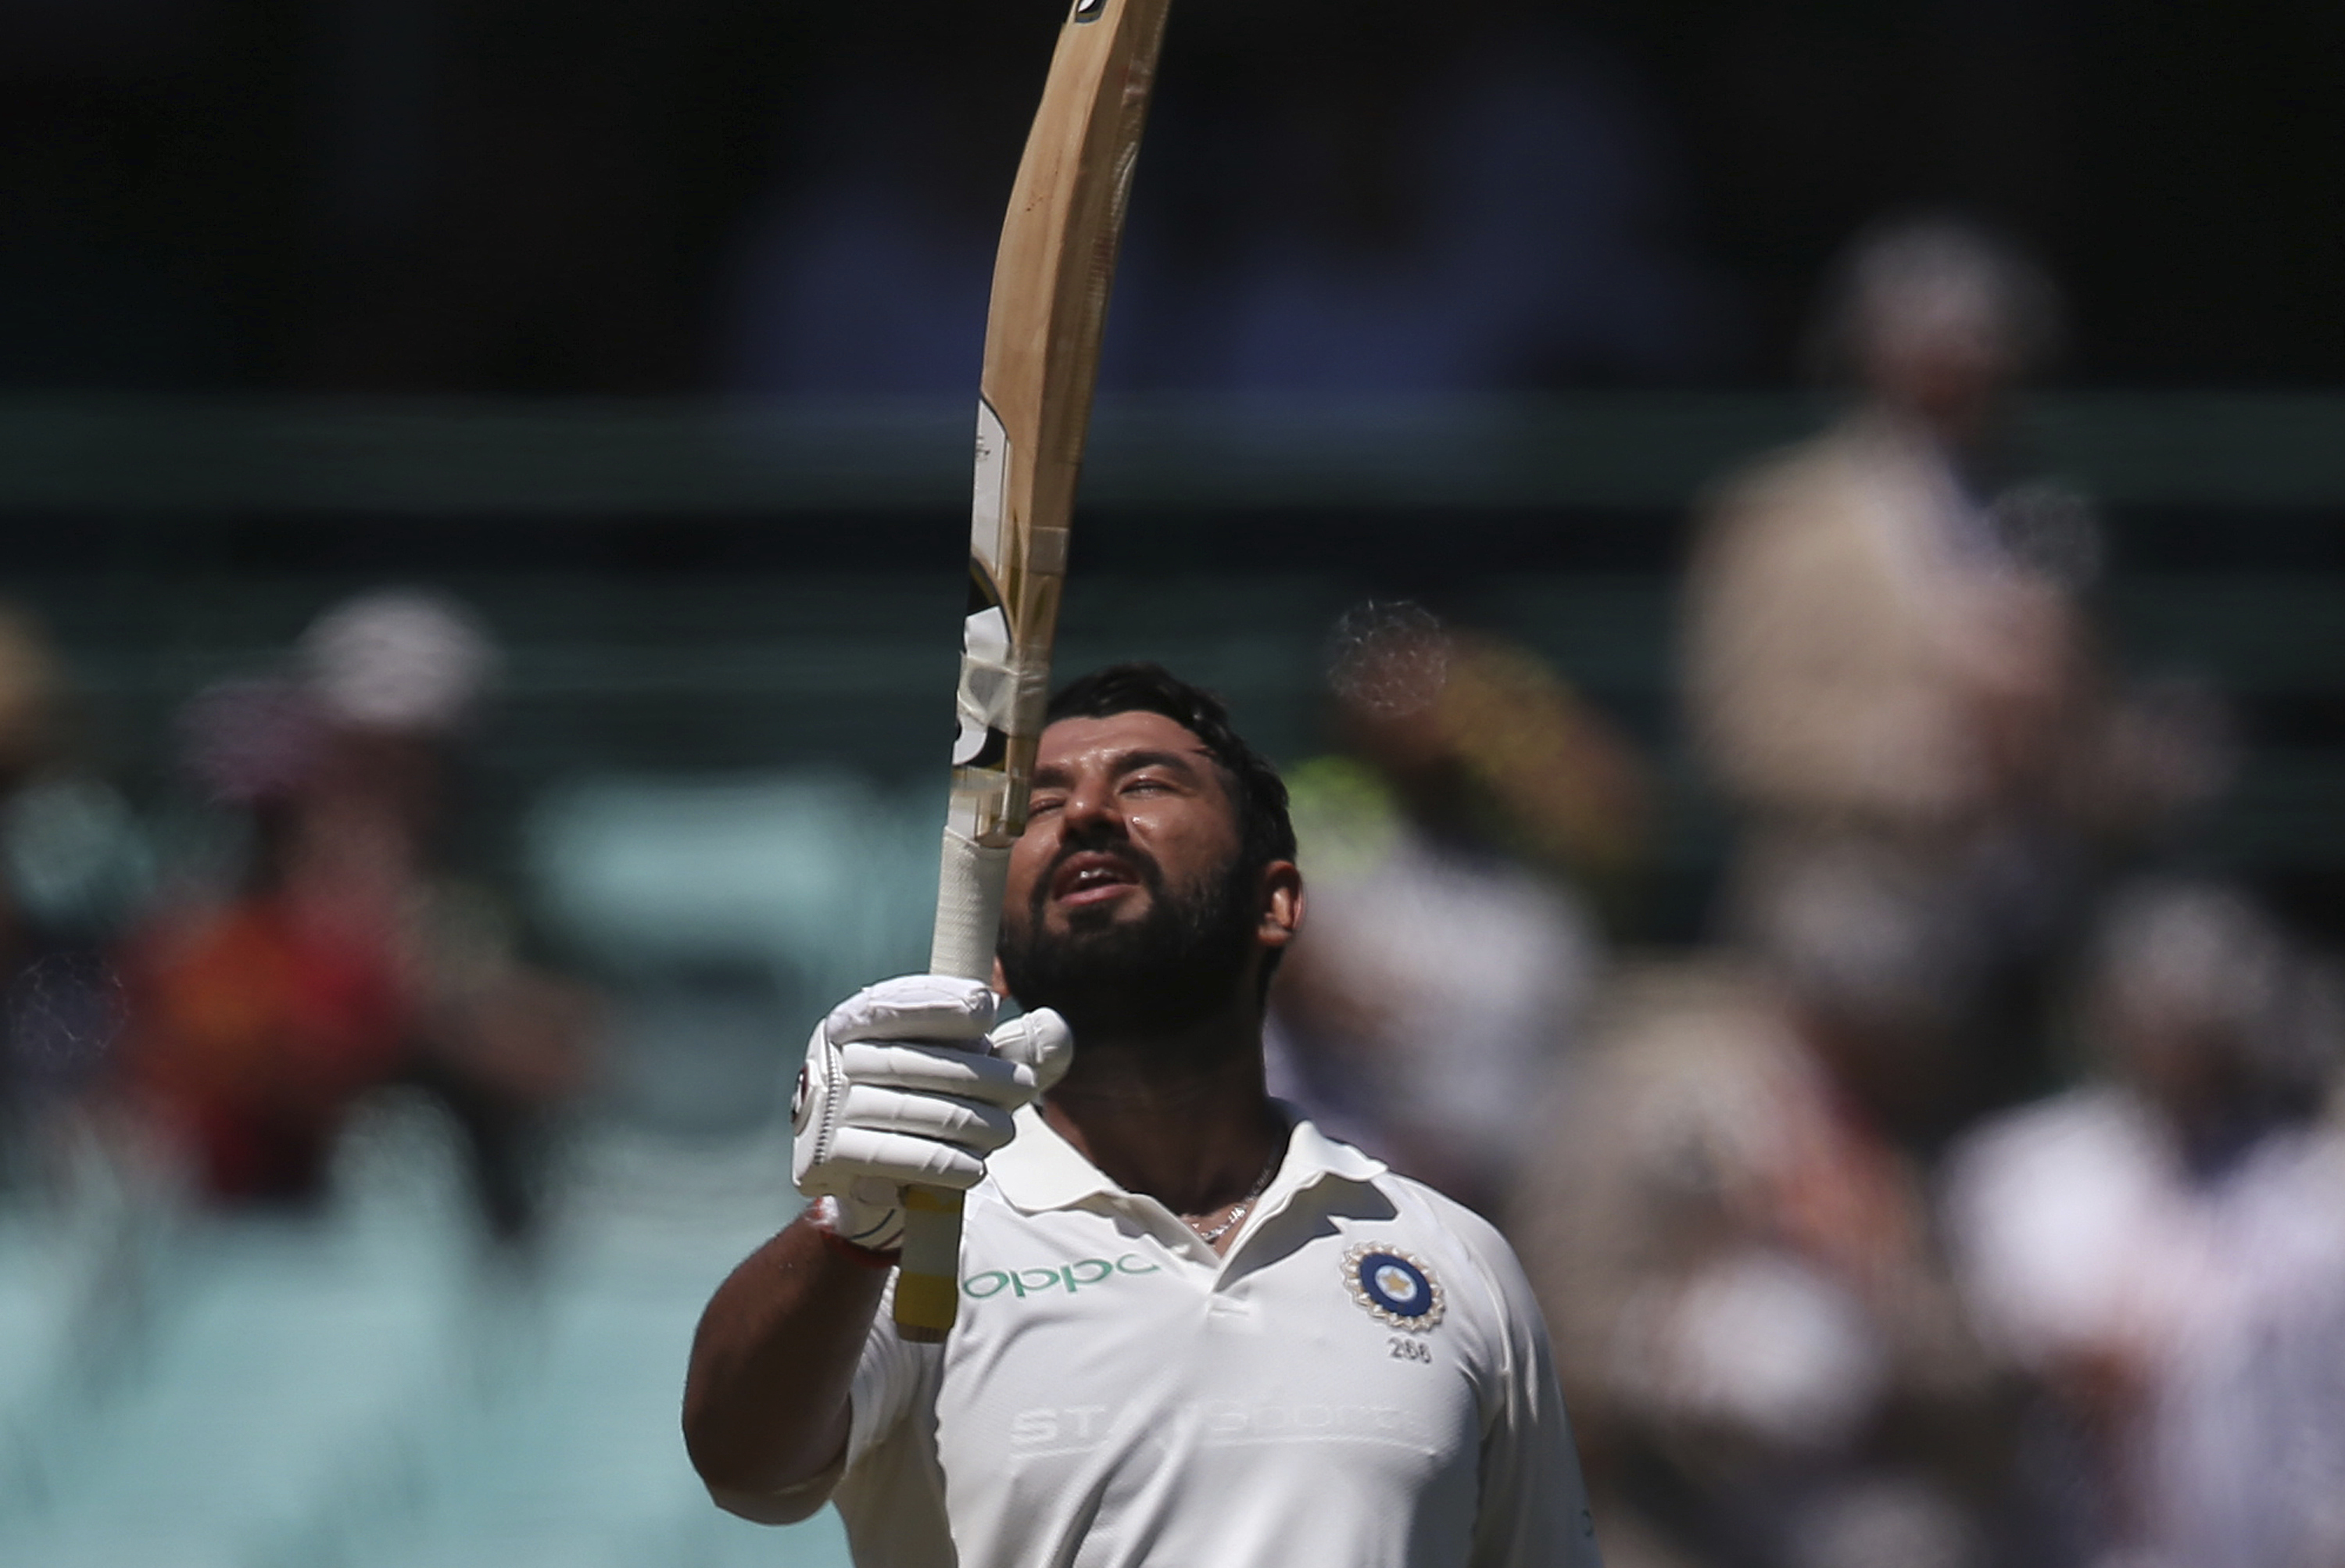 Cheteshwar Pujara celebrates making 150 runs against Australia on day 2 during the cricket test match in Sydney on Friday, January 4. His performance was the crucial variable In the context of the success in Australia